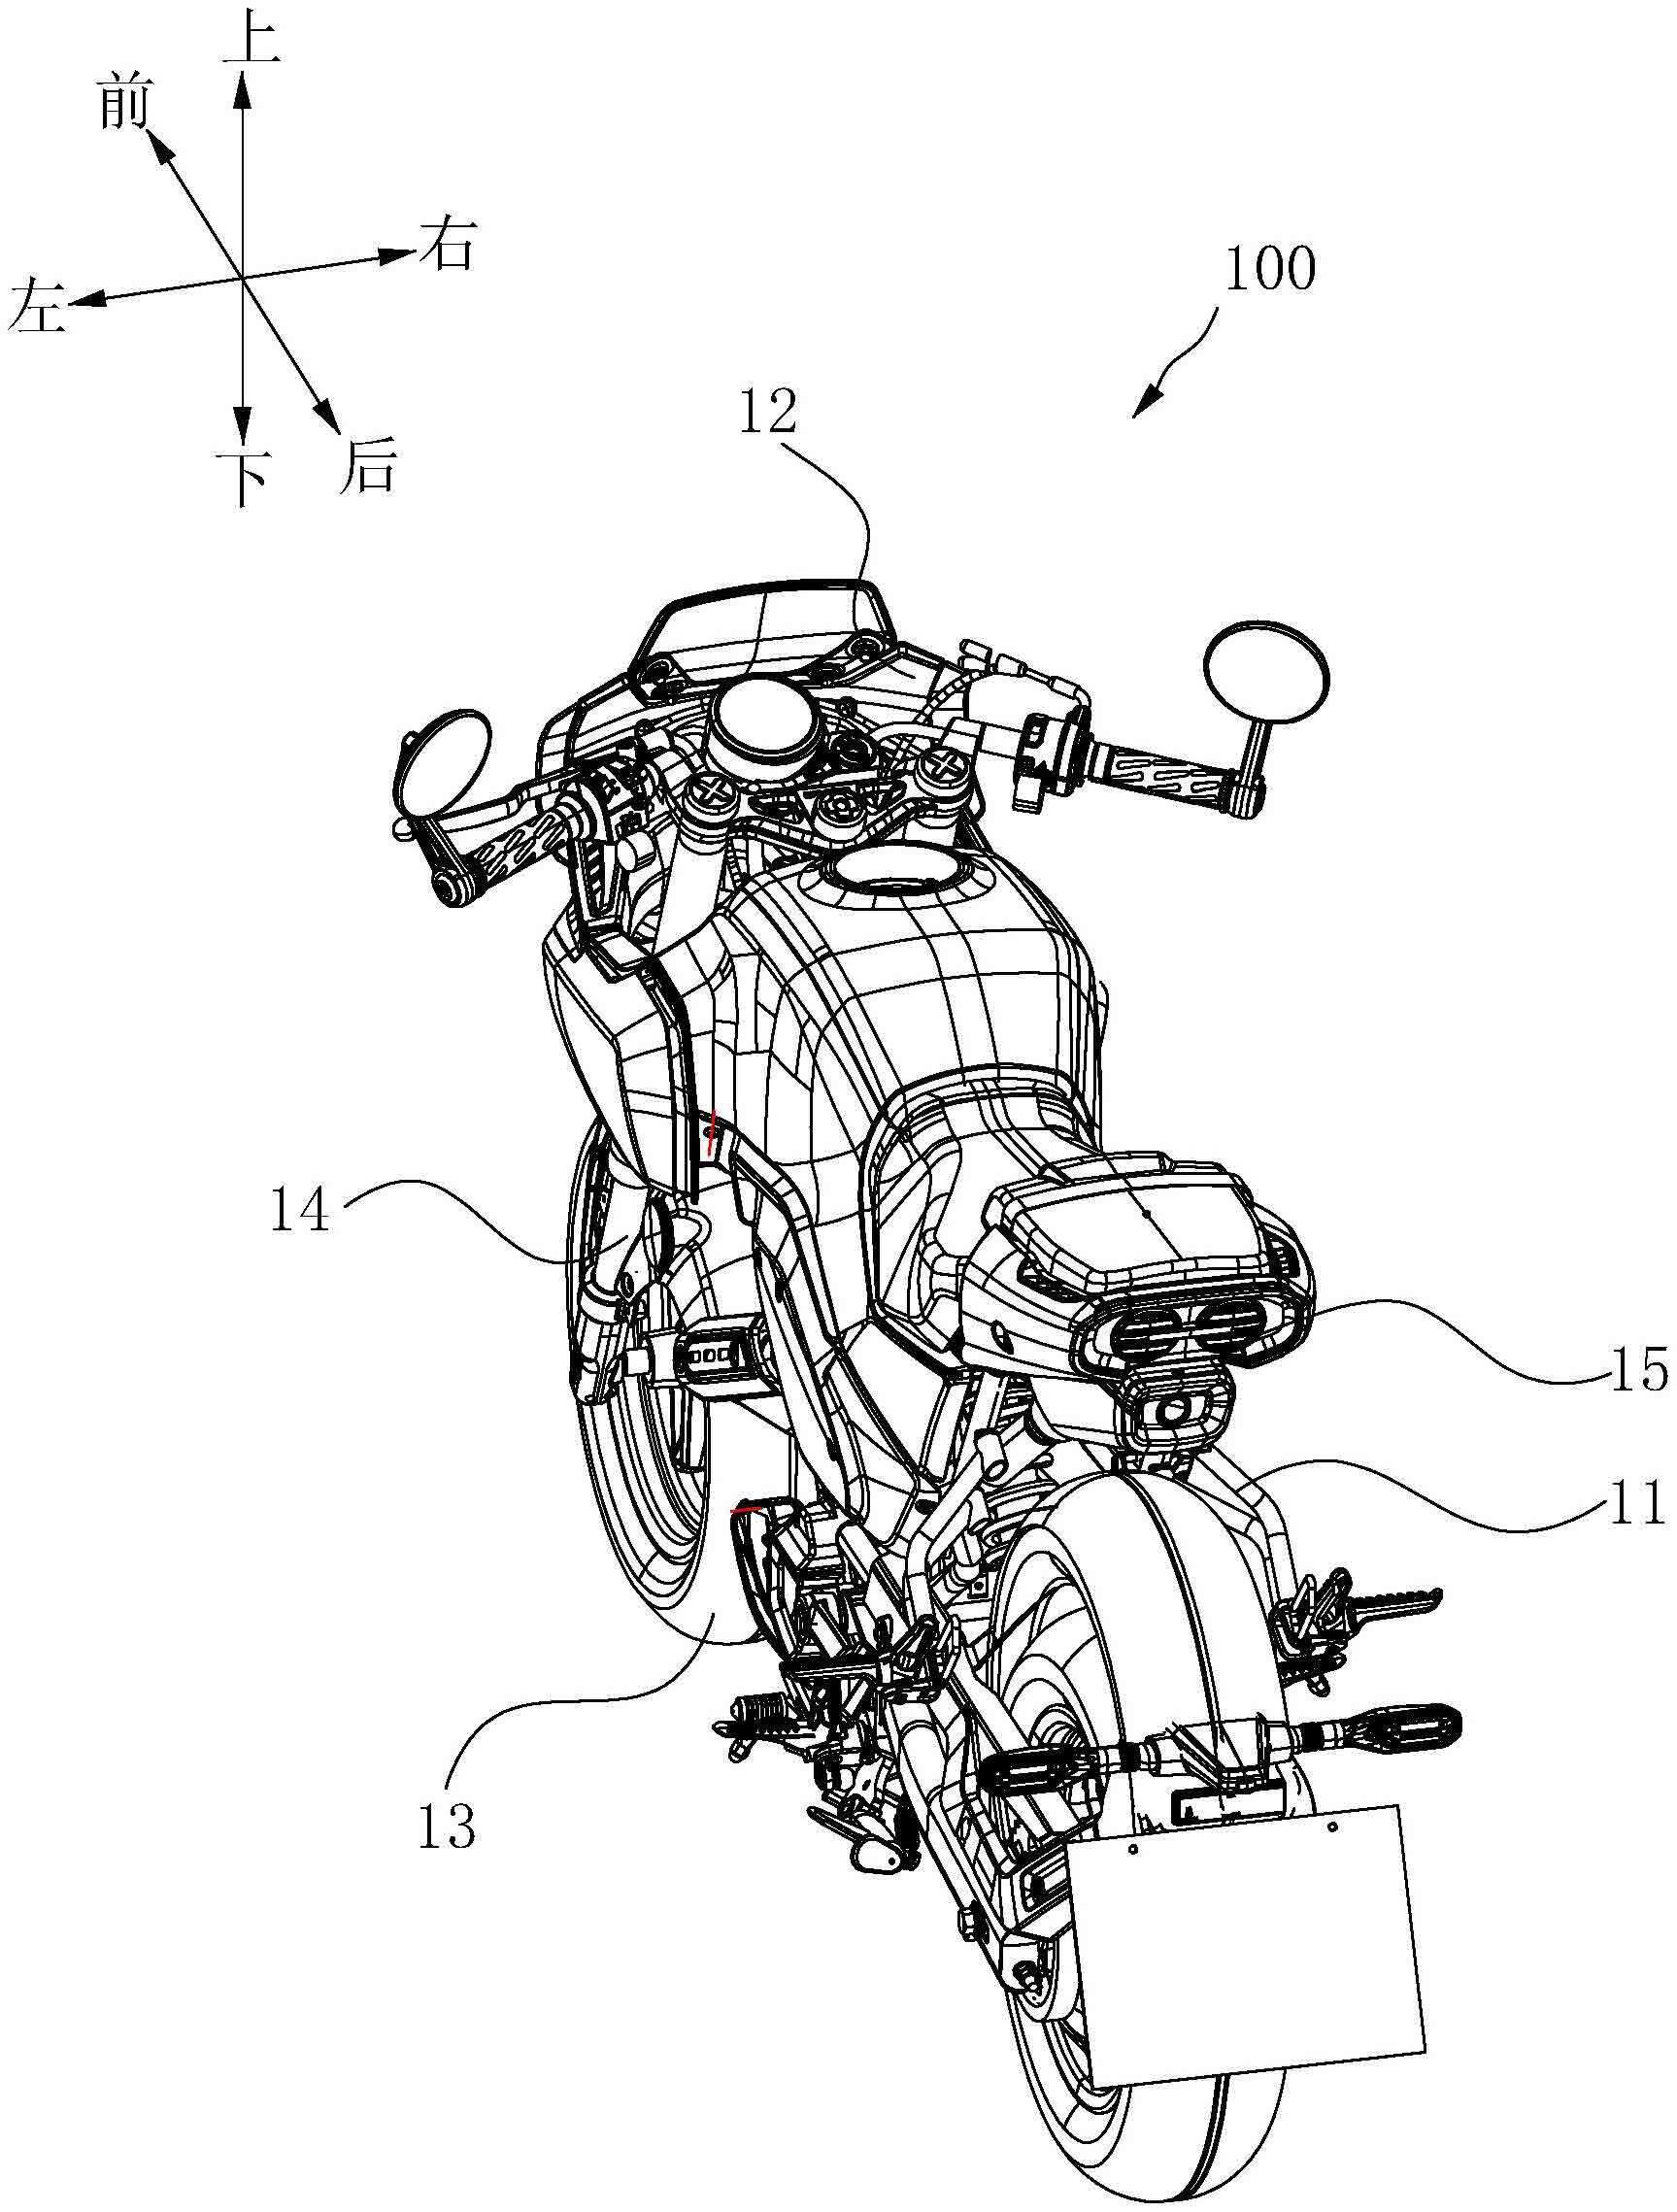 This patent illustration provides a good look at the rear of the bike.